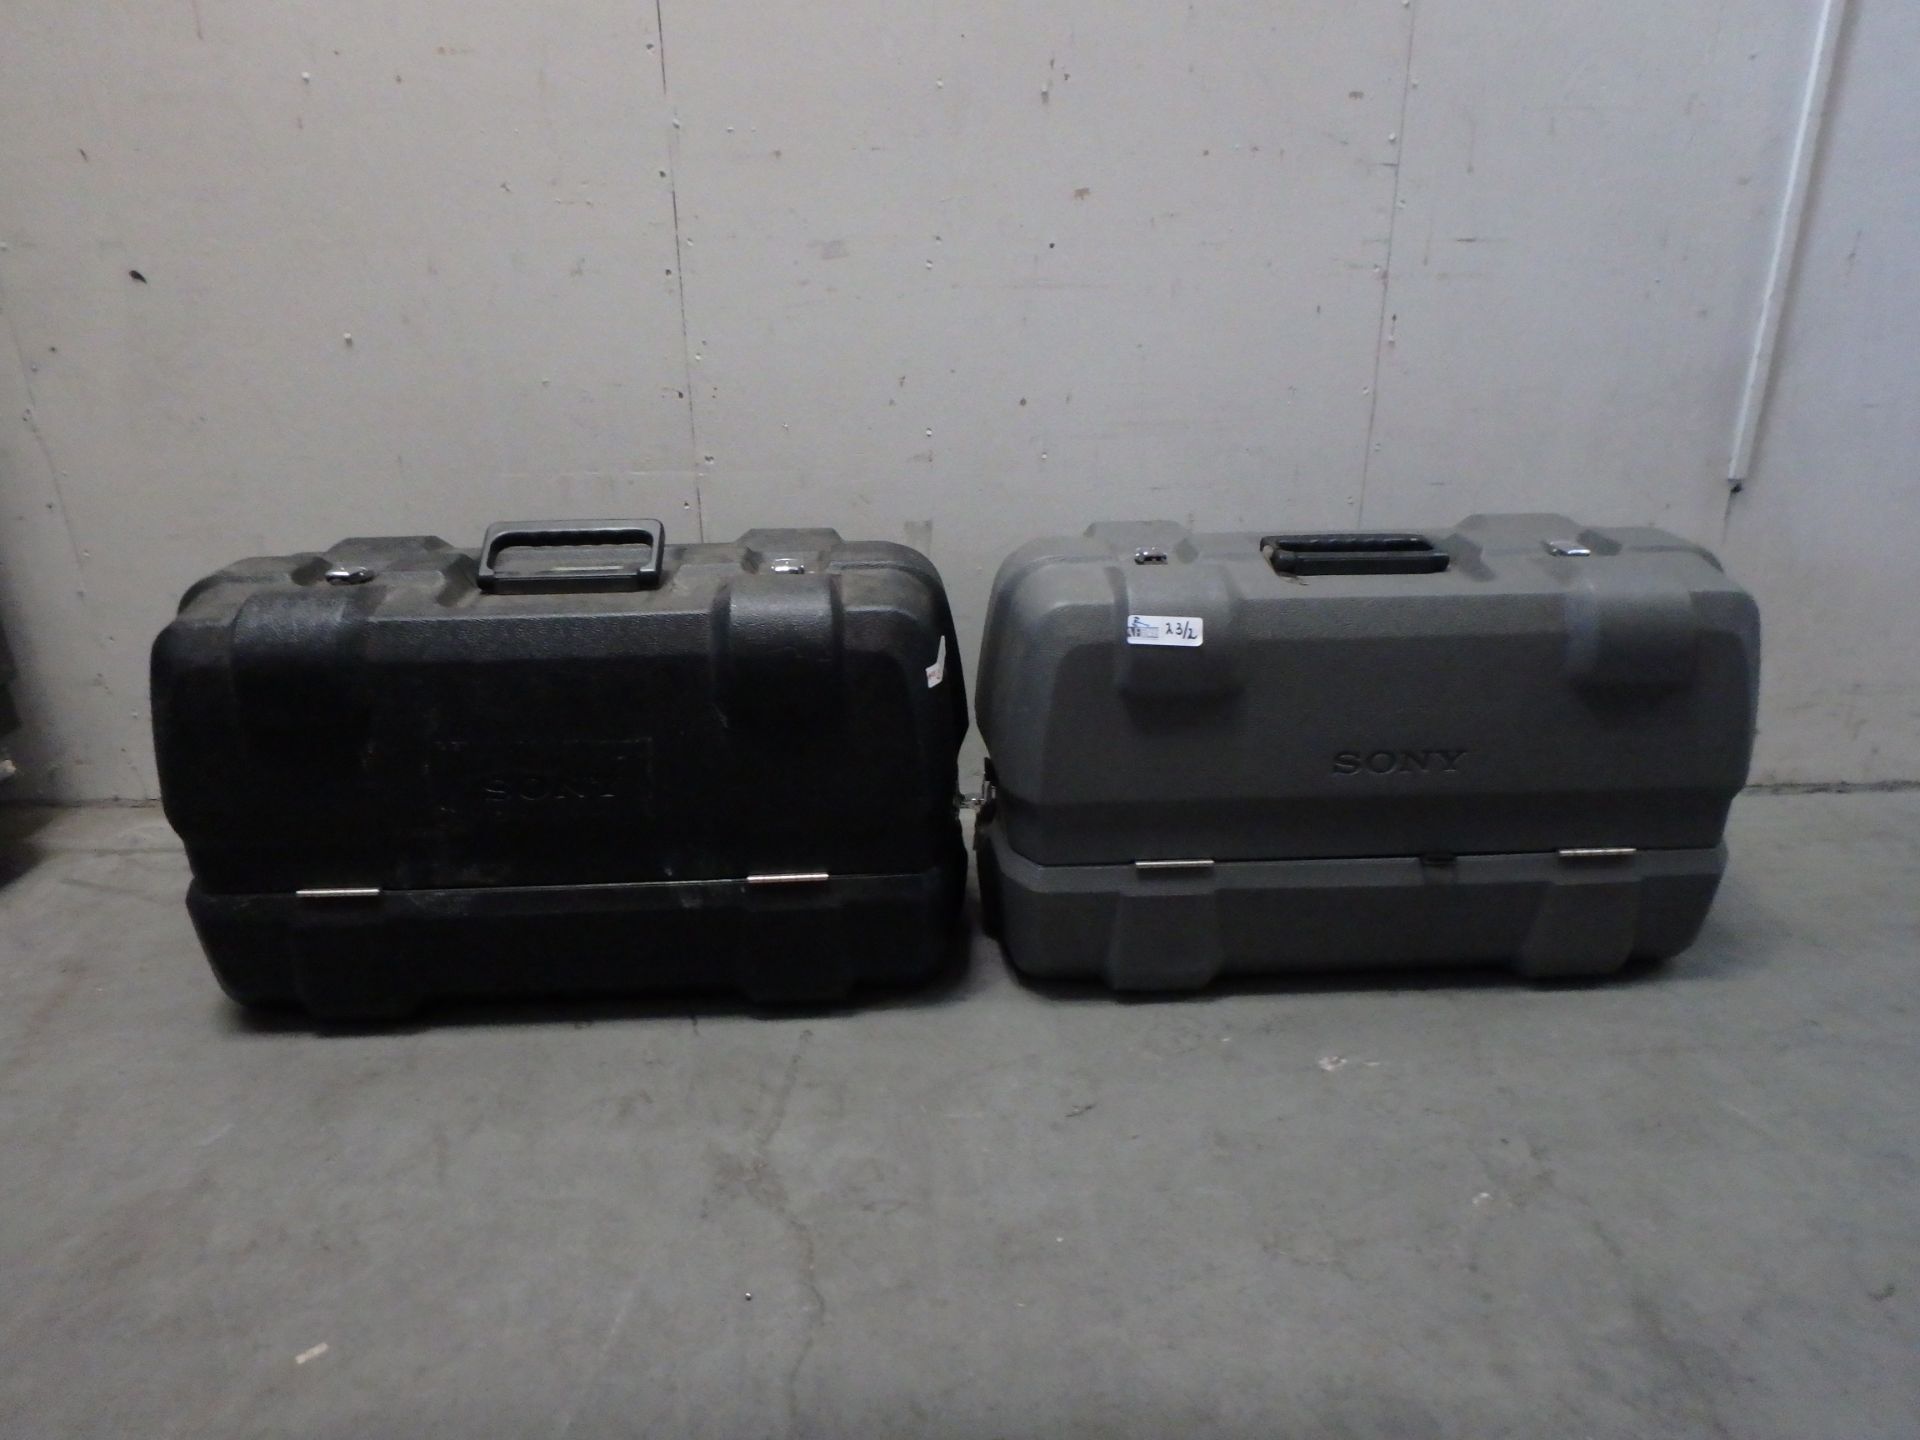 LOT OF 2 CAMERA CASES